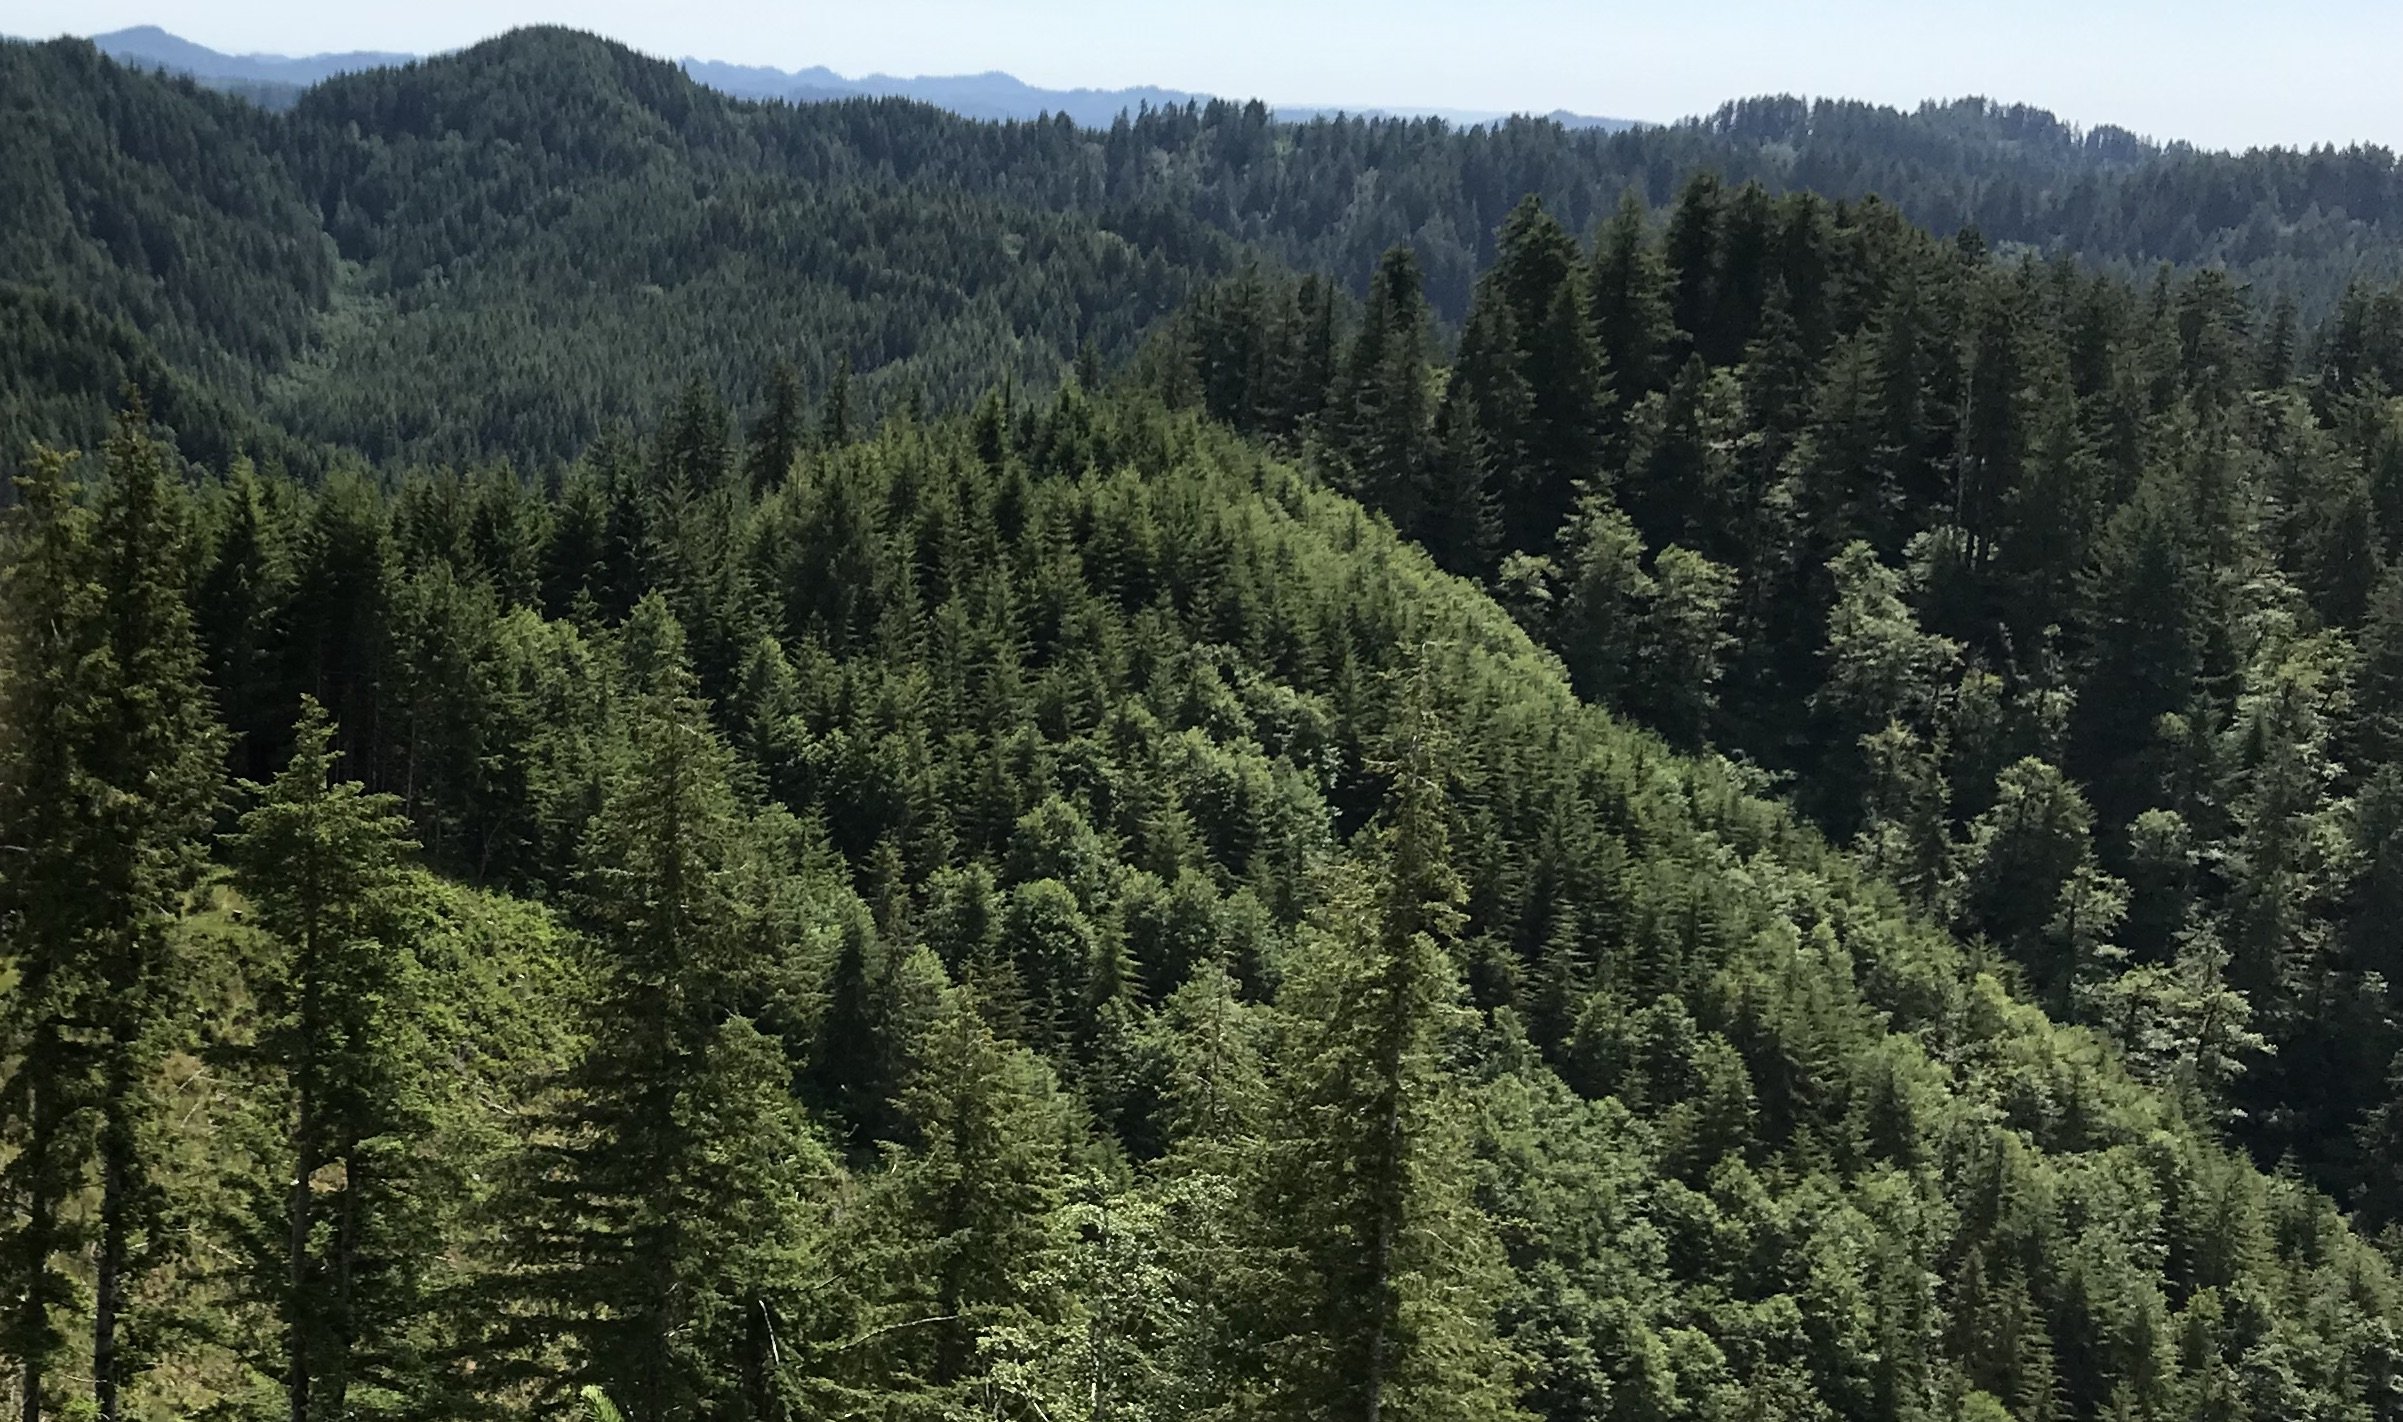 USDA and OR Dept of State Lands: Management on the Elliott State Forest